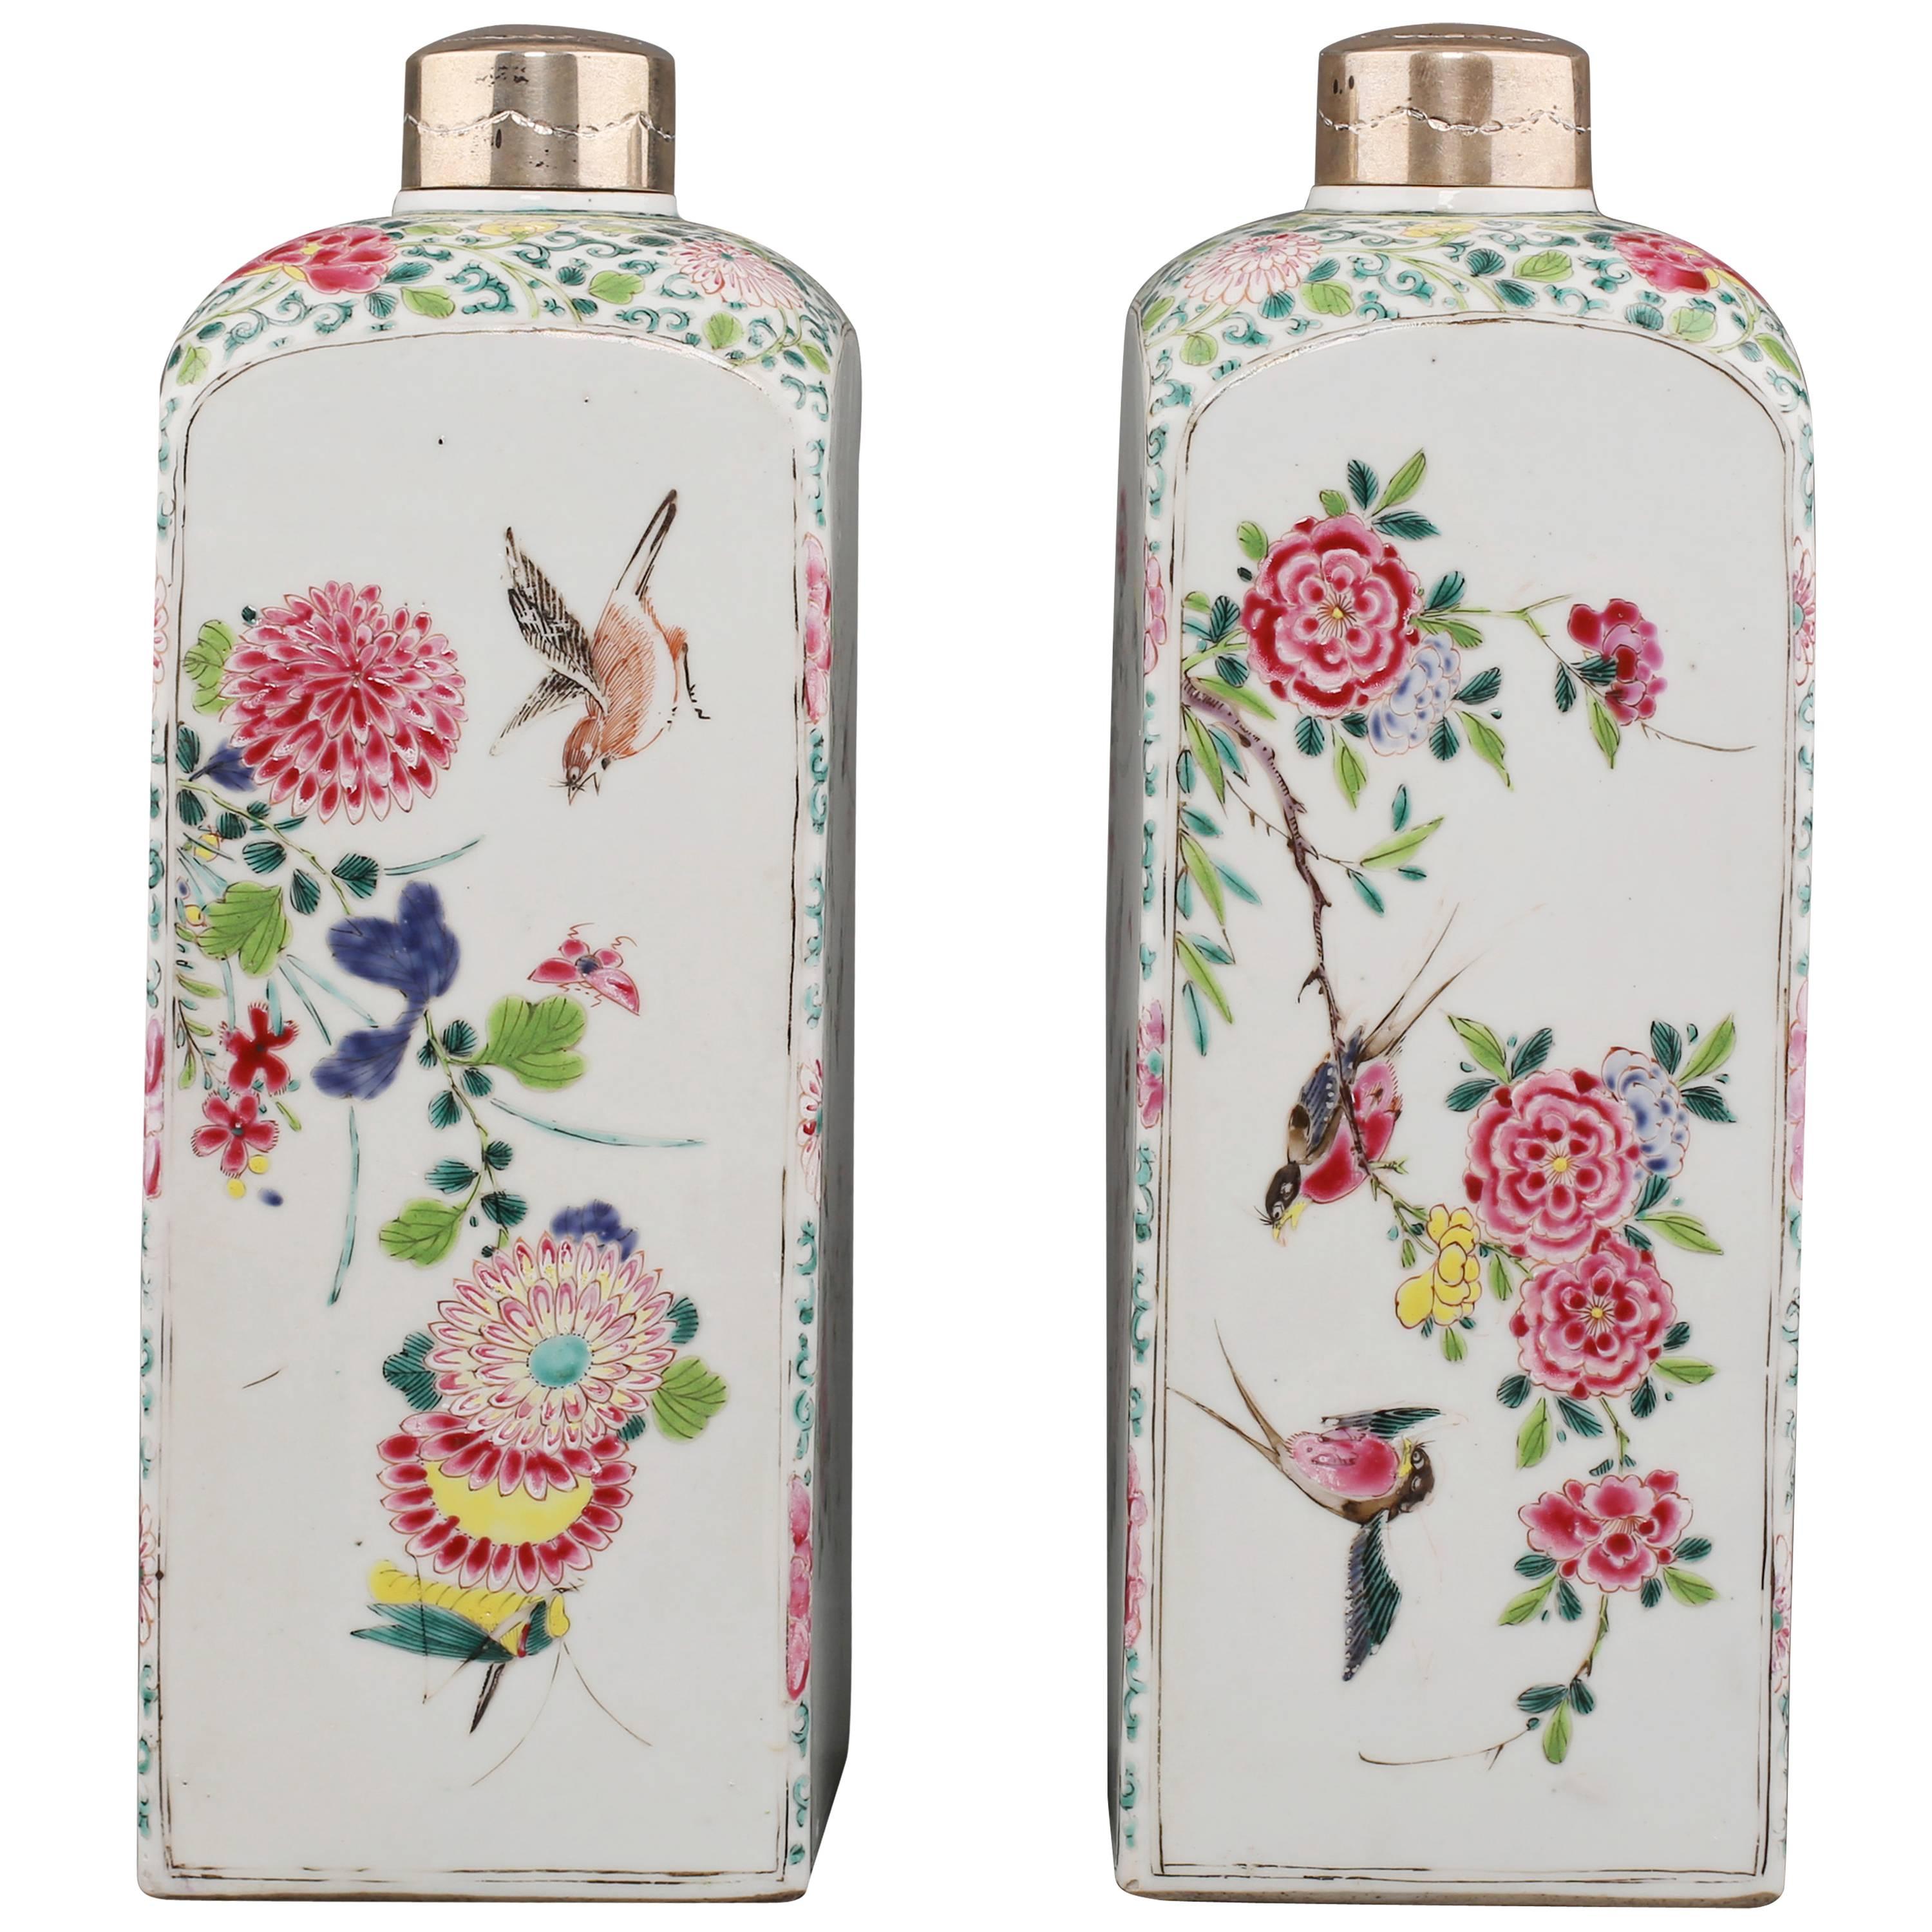 Pair of Famille Rose Square Canisters, 18th Century